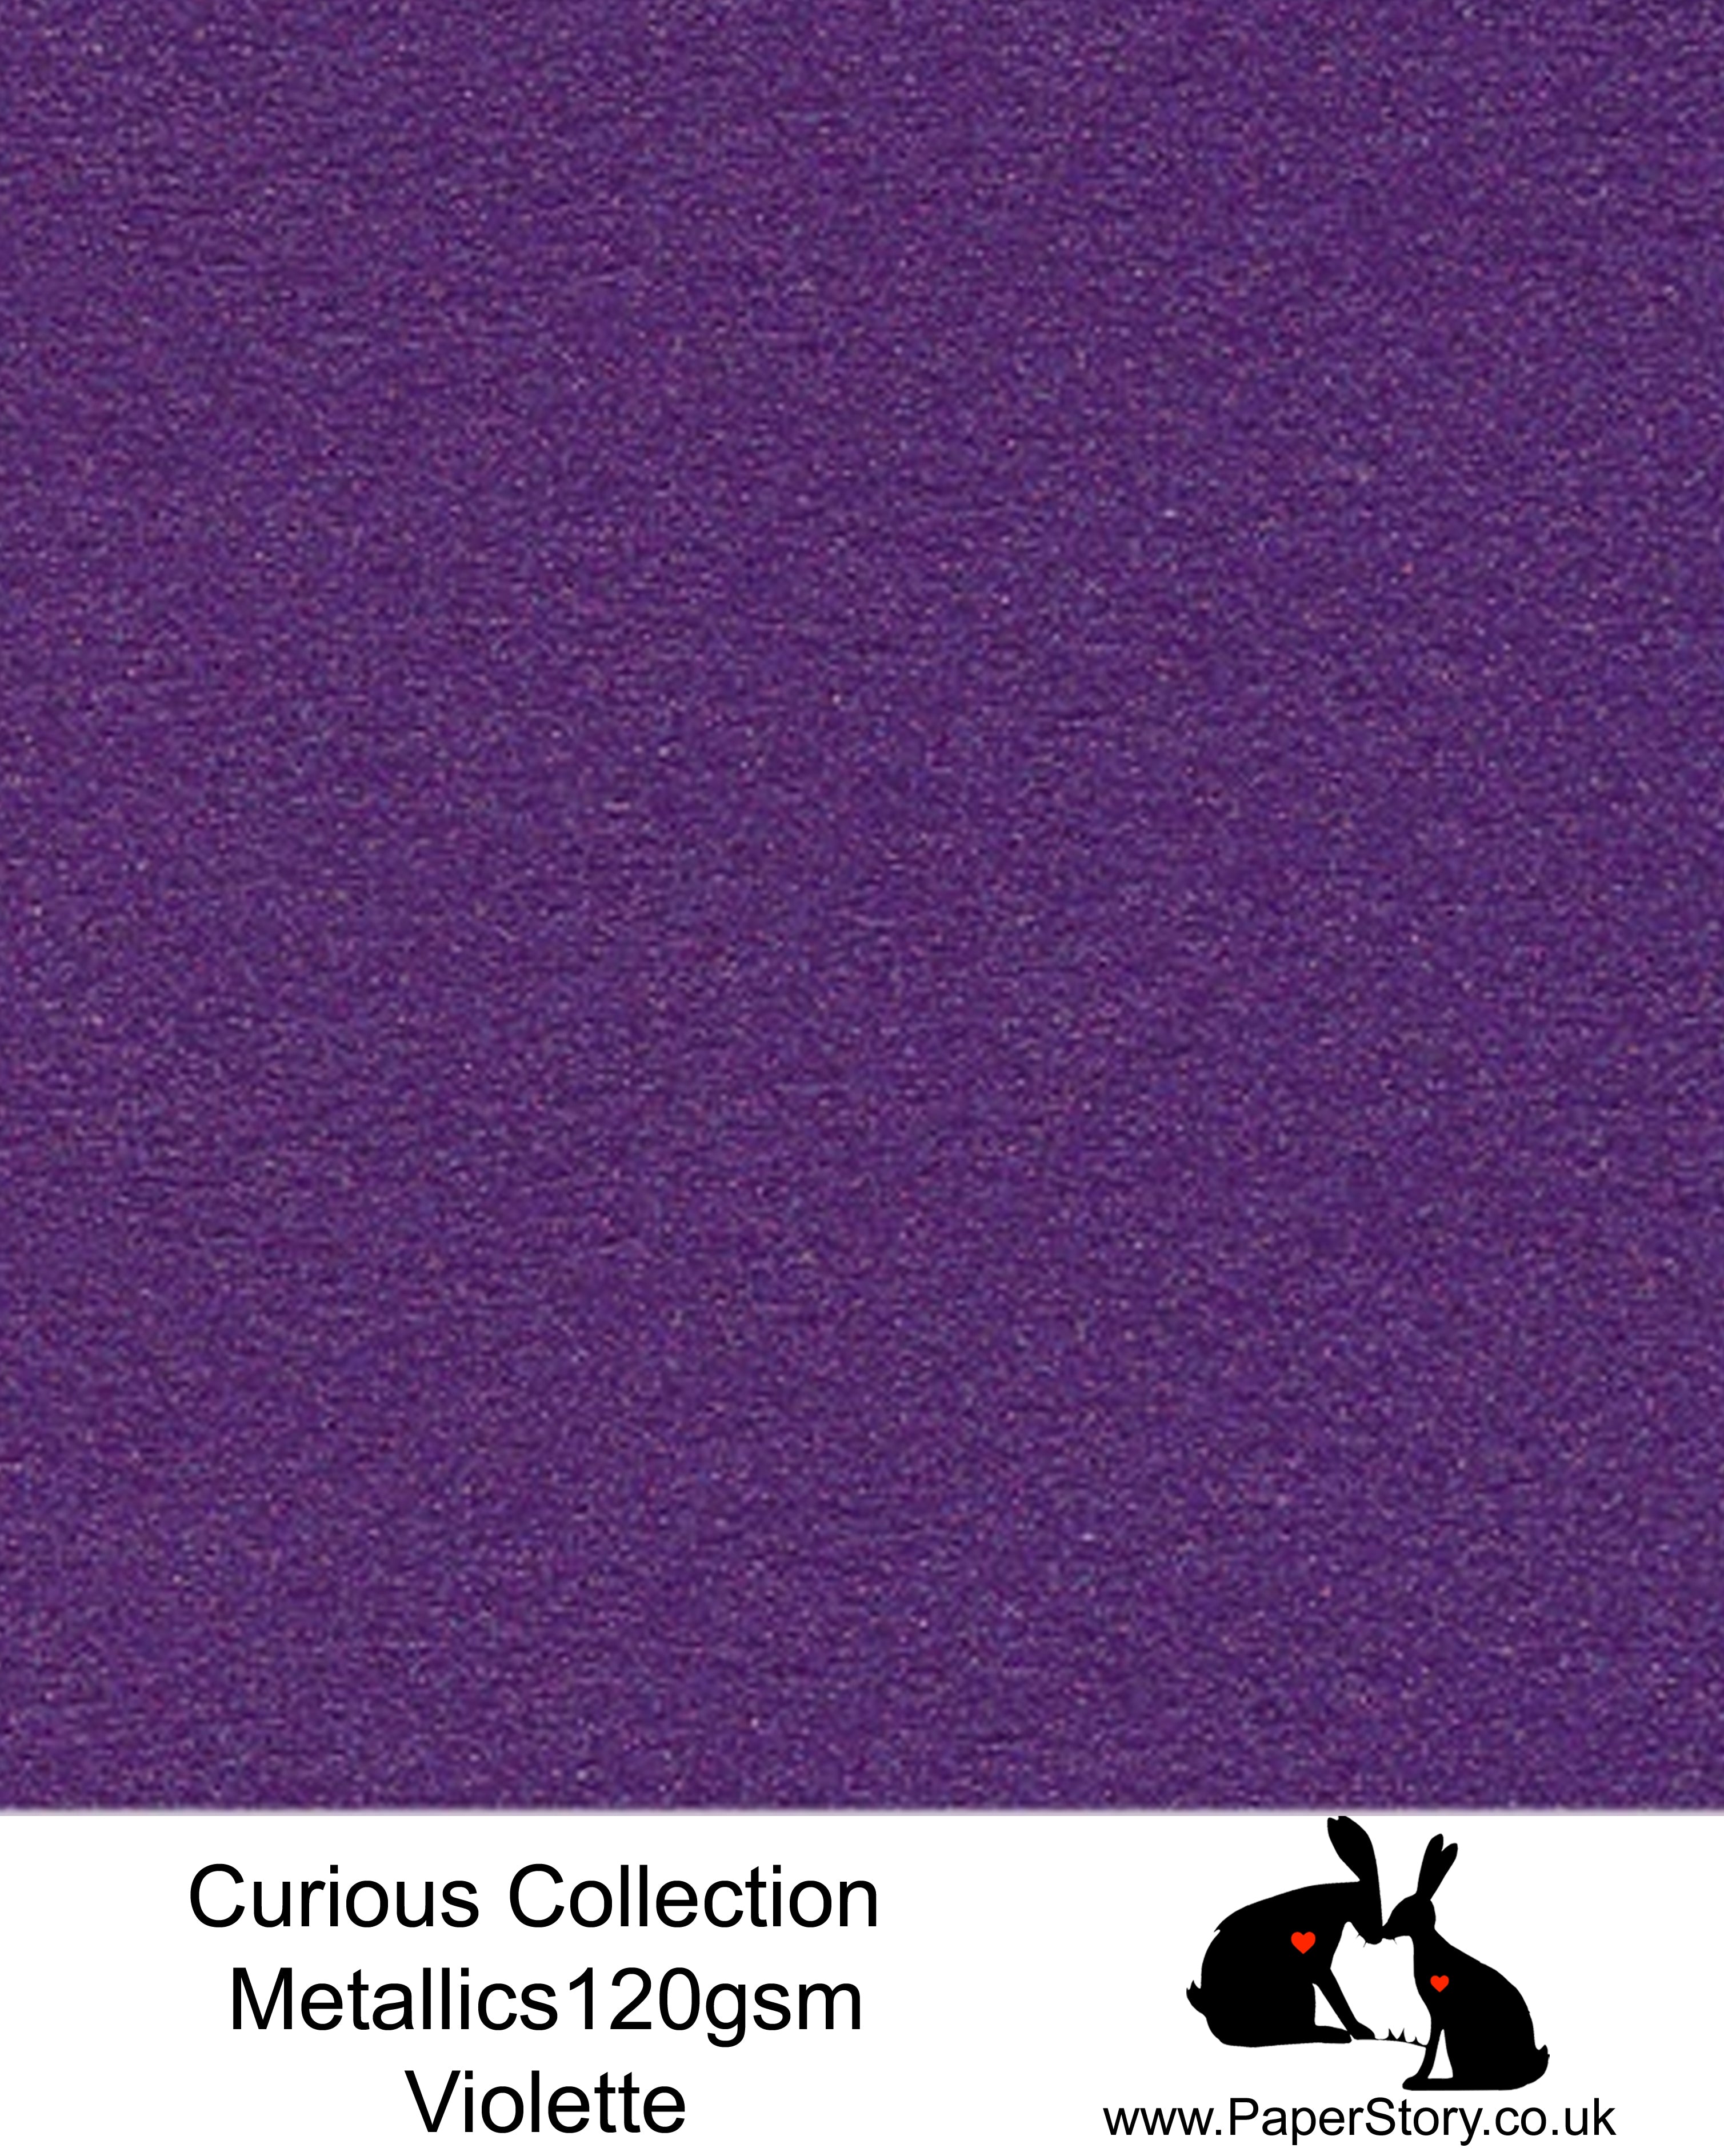 Curious Collection Curious Metallics. Stunning purple limited availability as this colour is now a rare find. This unique metallic paper is unlike any other metallic shimmer surface, the natural underlying wove surface of Curious Metallics enhances the stunning metallic shimmer,